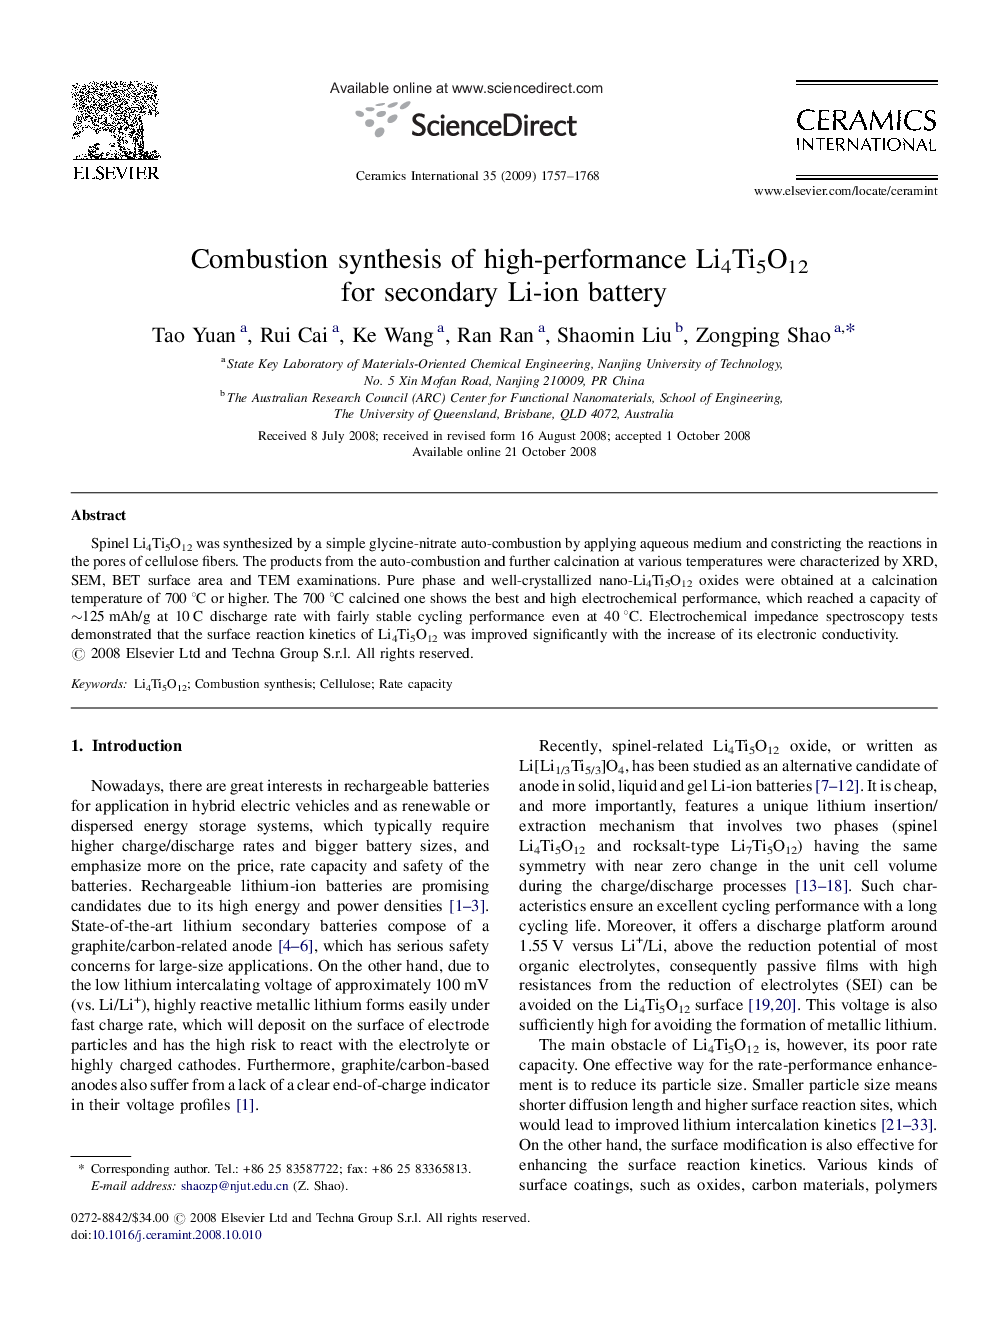 Combustion synthesis of high-performance Li4Ti5O12 for secondary Li-ion battery